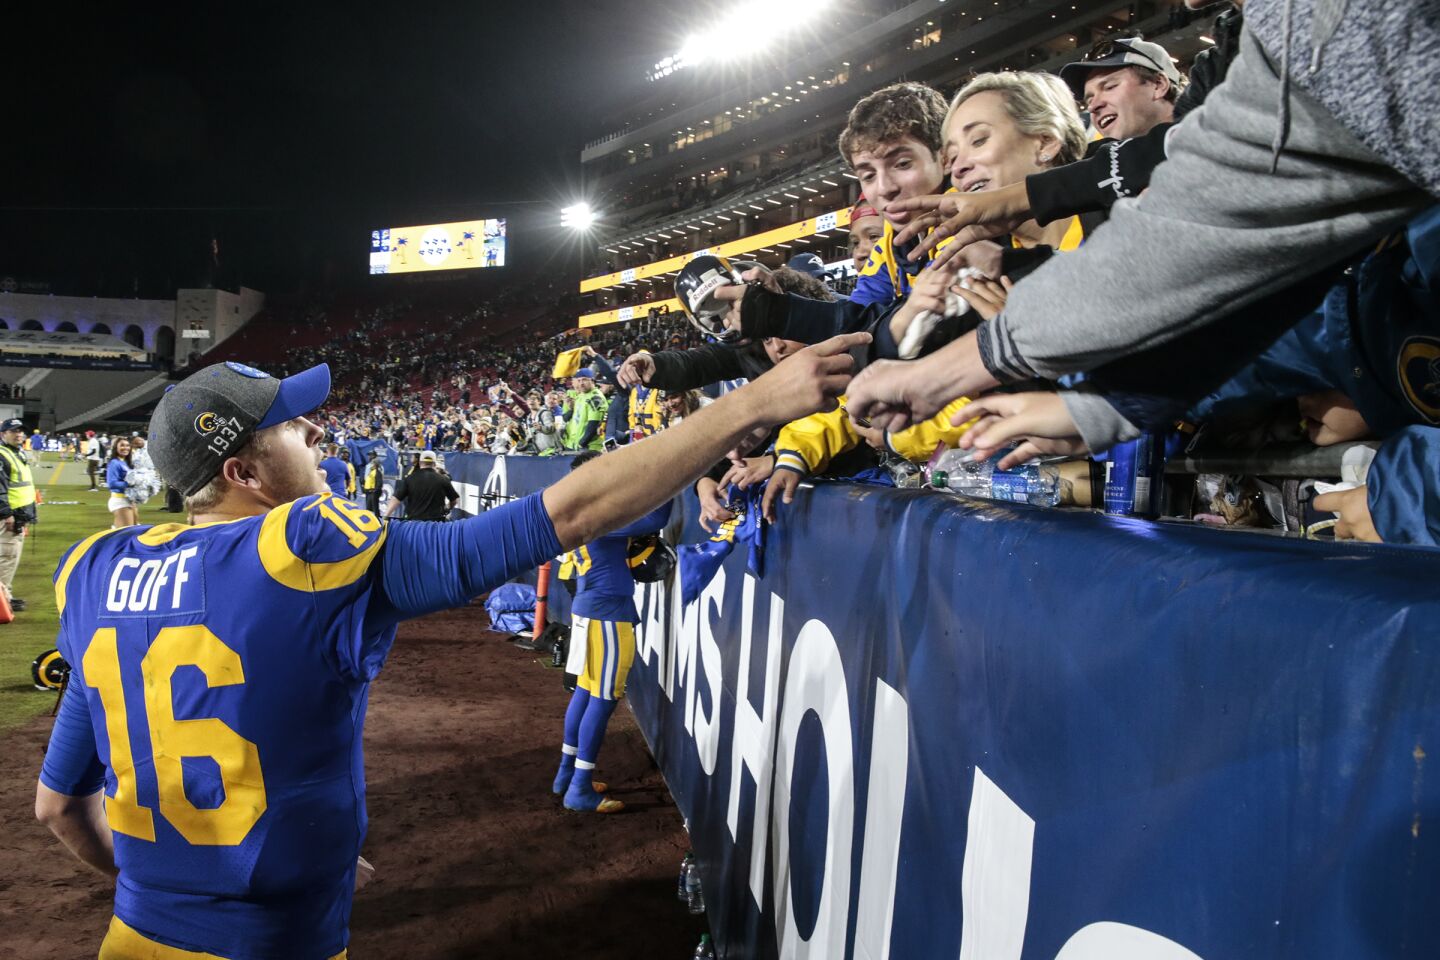 Rams quarterback Jared Goff gives a sweatband to a fan after leading his team to a 28-12 win over the Seattle Seahawks.